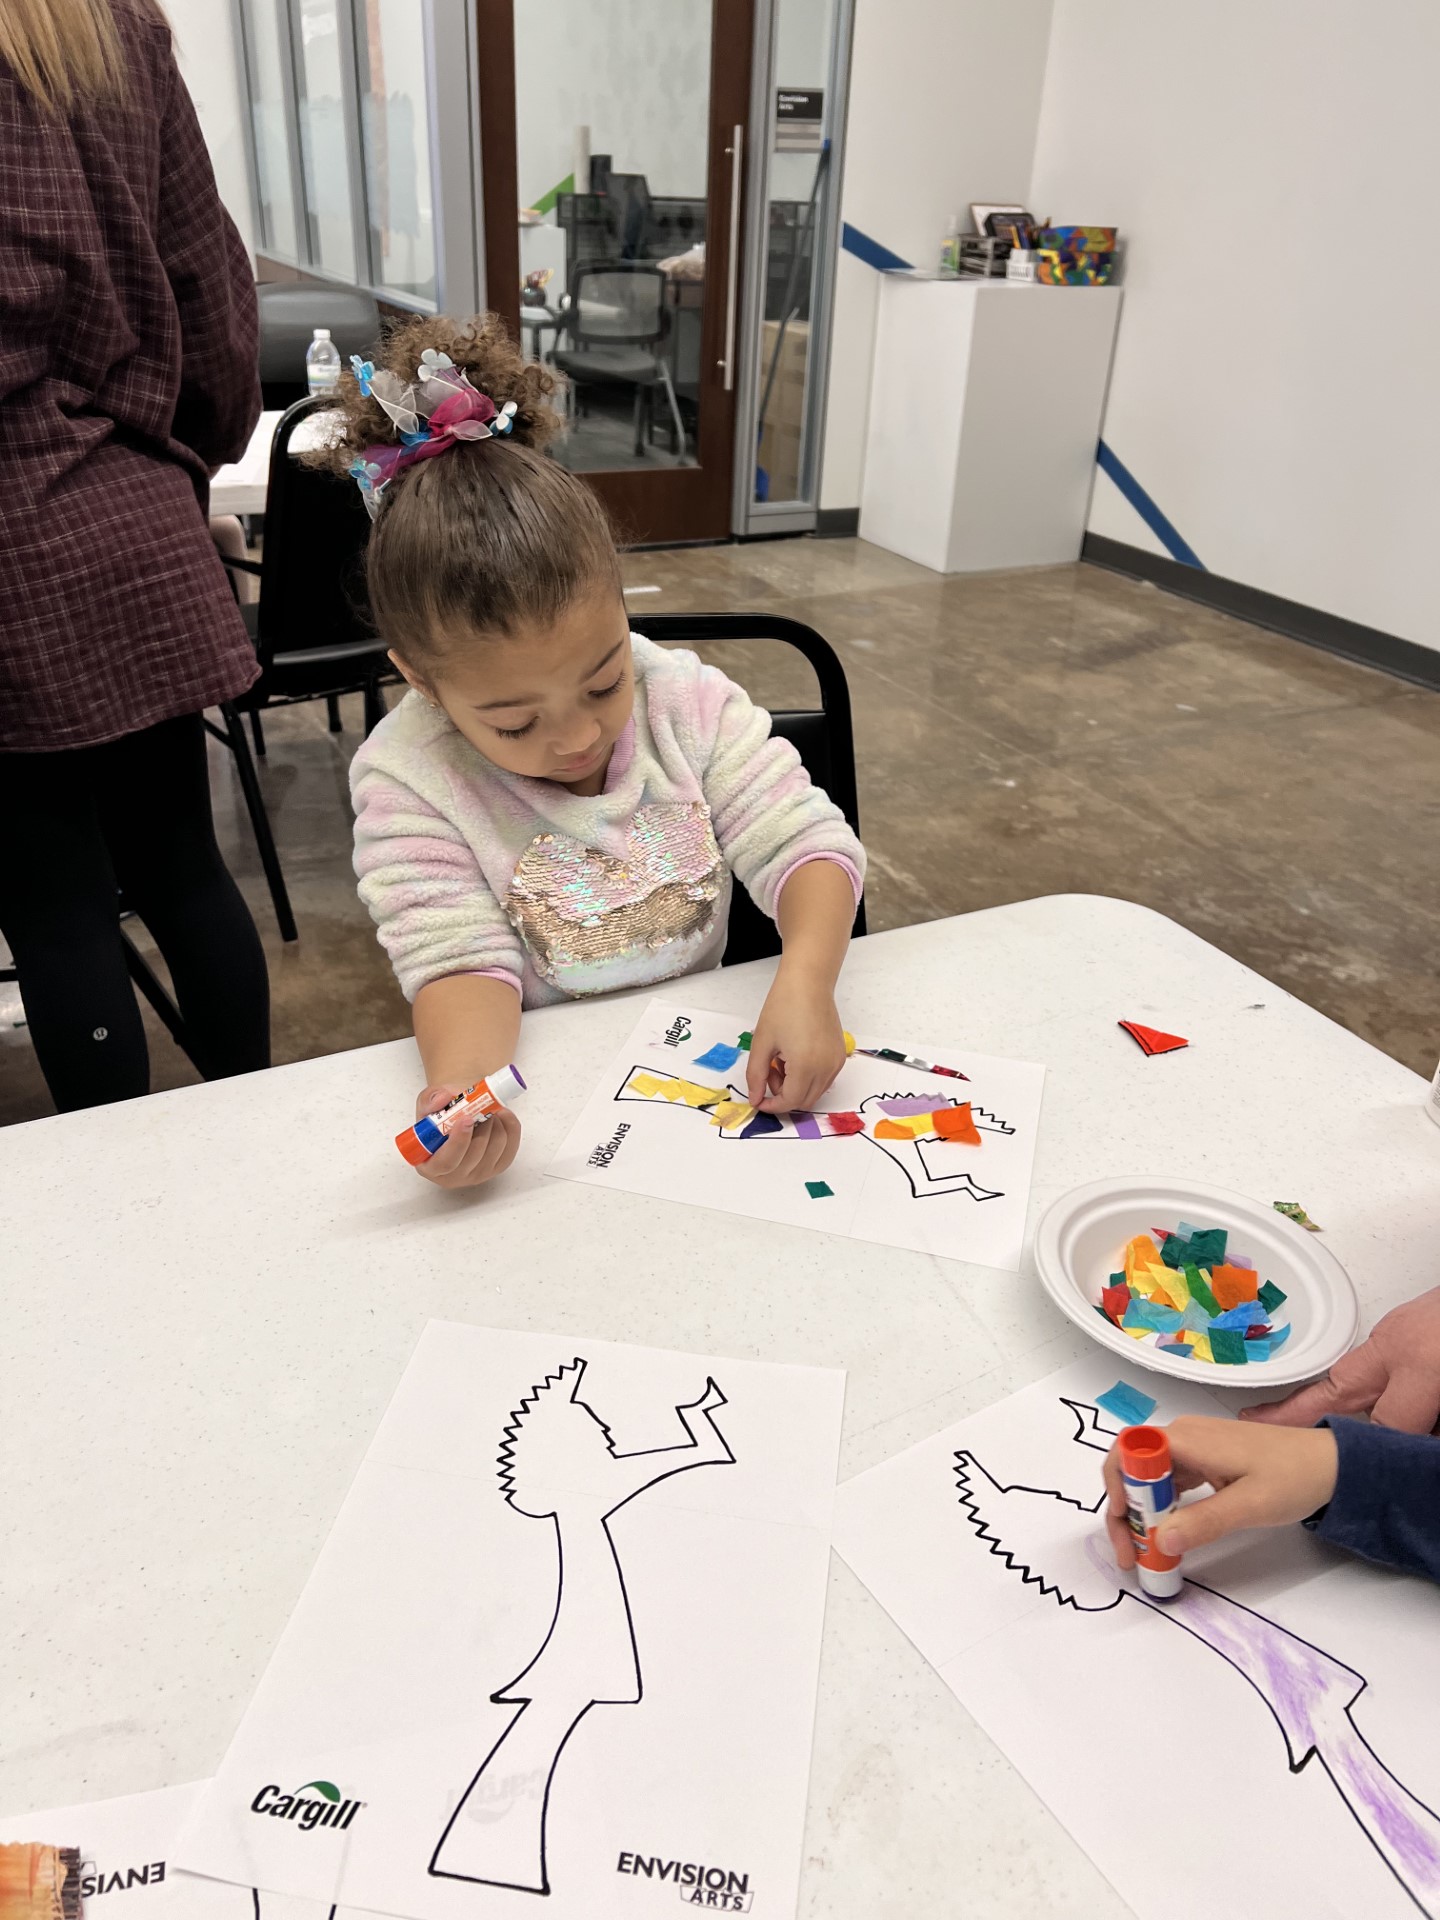 A young child at an art table smiling.